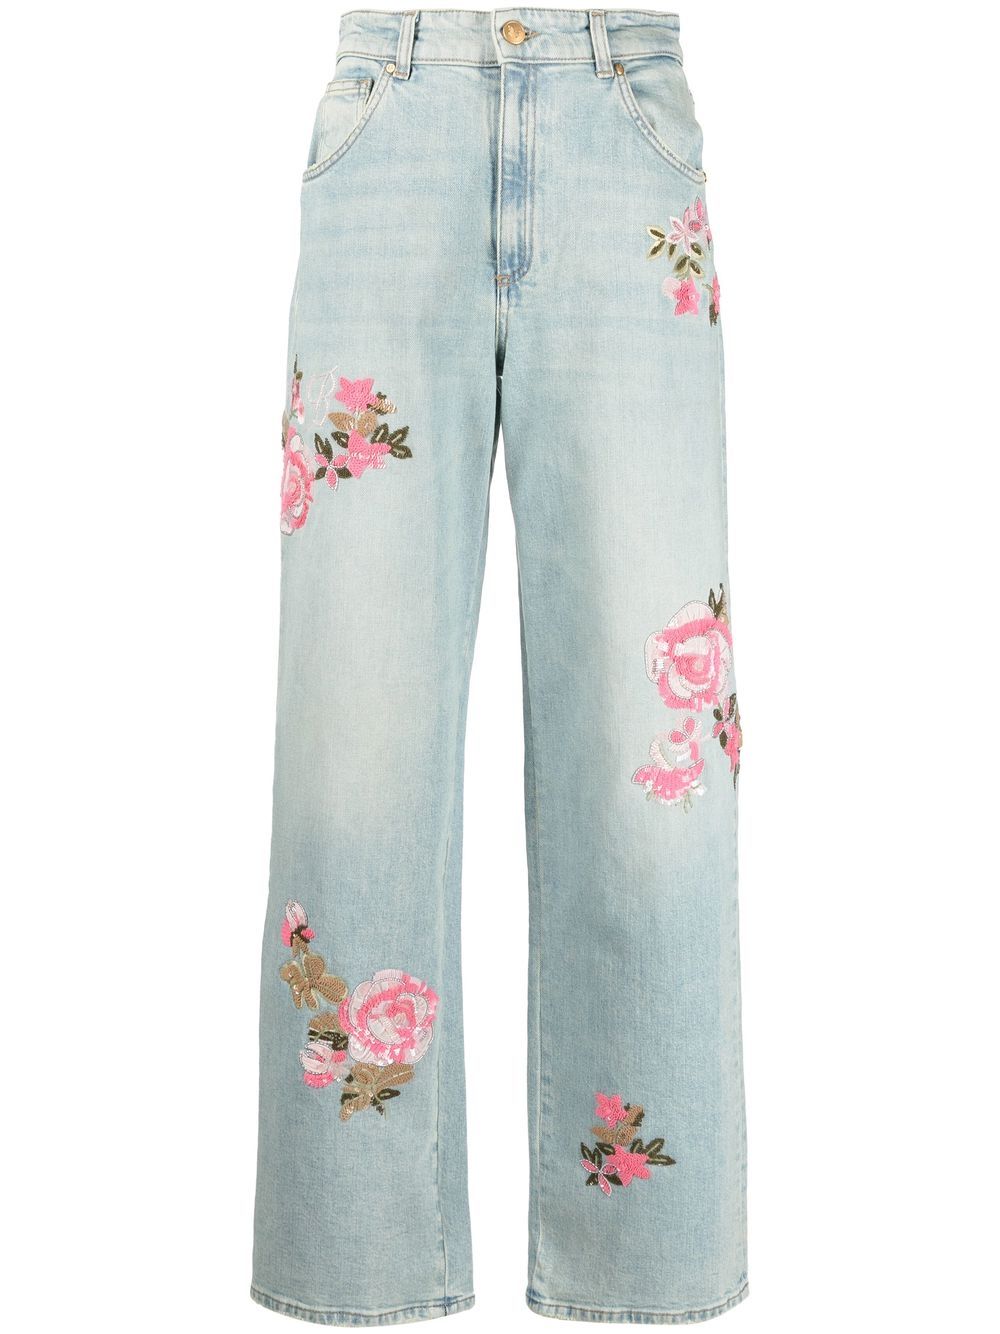 Is That The New Hippie Floral Embroidery Raw Hem Flare Leg Jeans